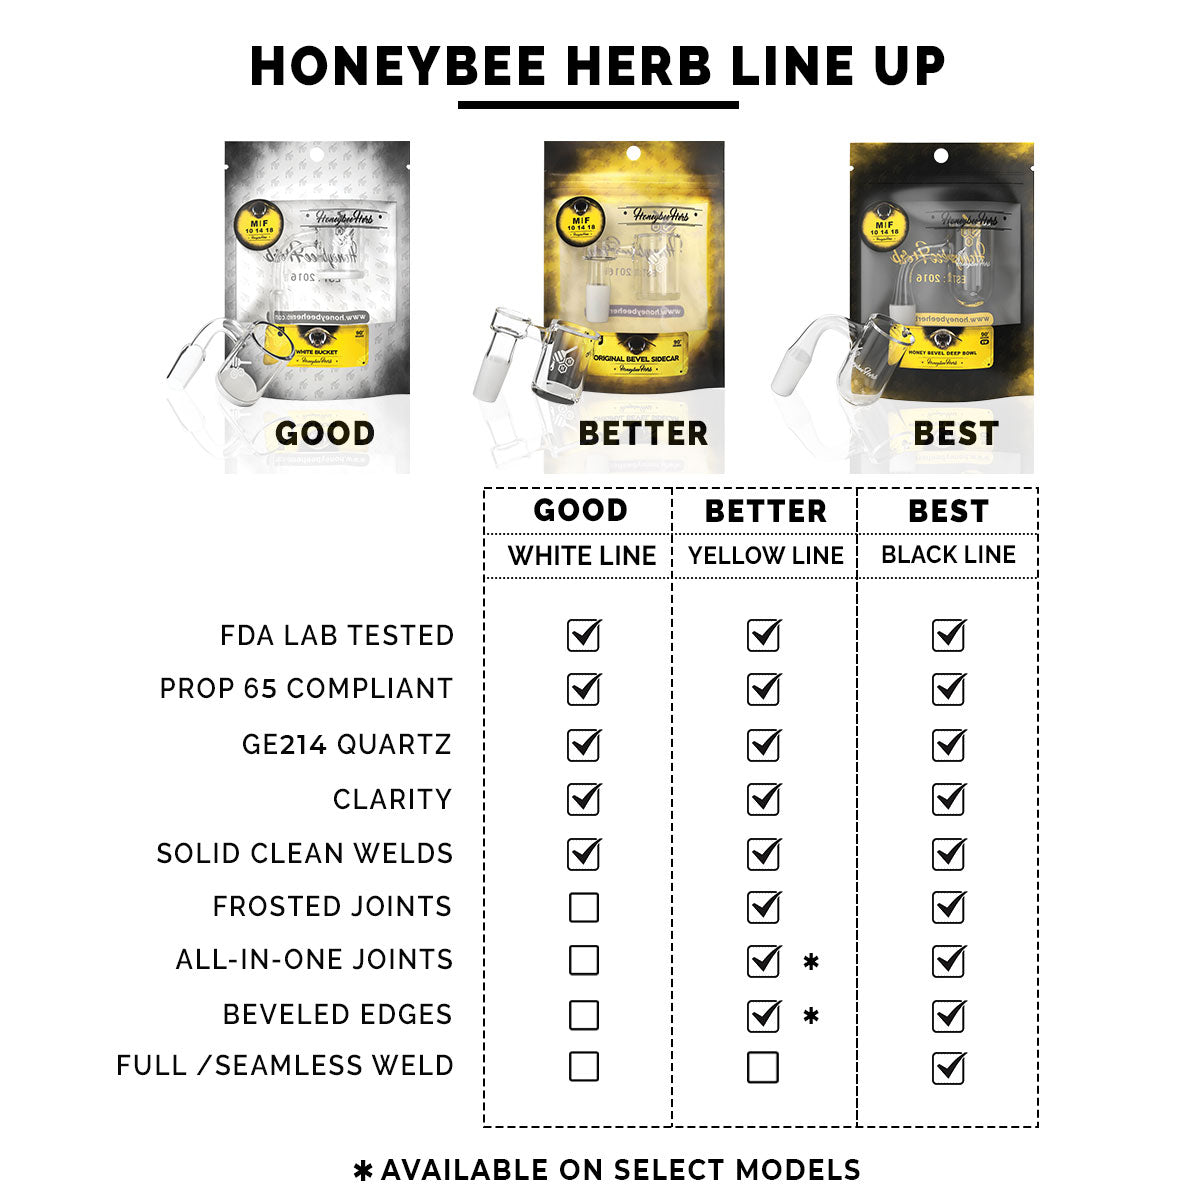 Honeybee Herb quartz banger comparison chart, showcasing product quality tiers from 'Good' to 'Best'.